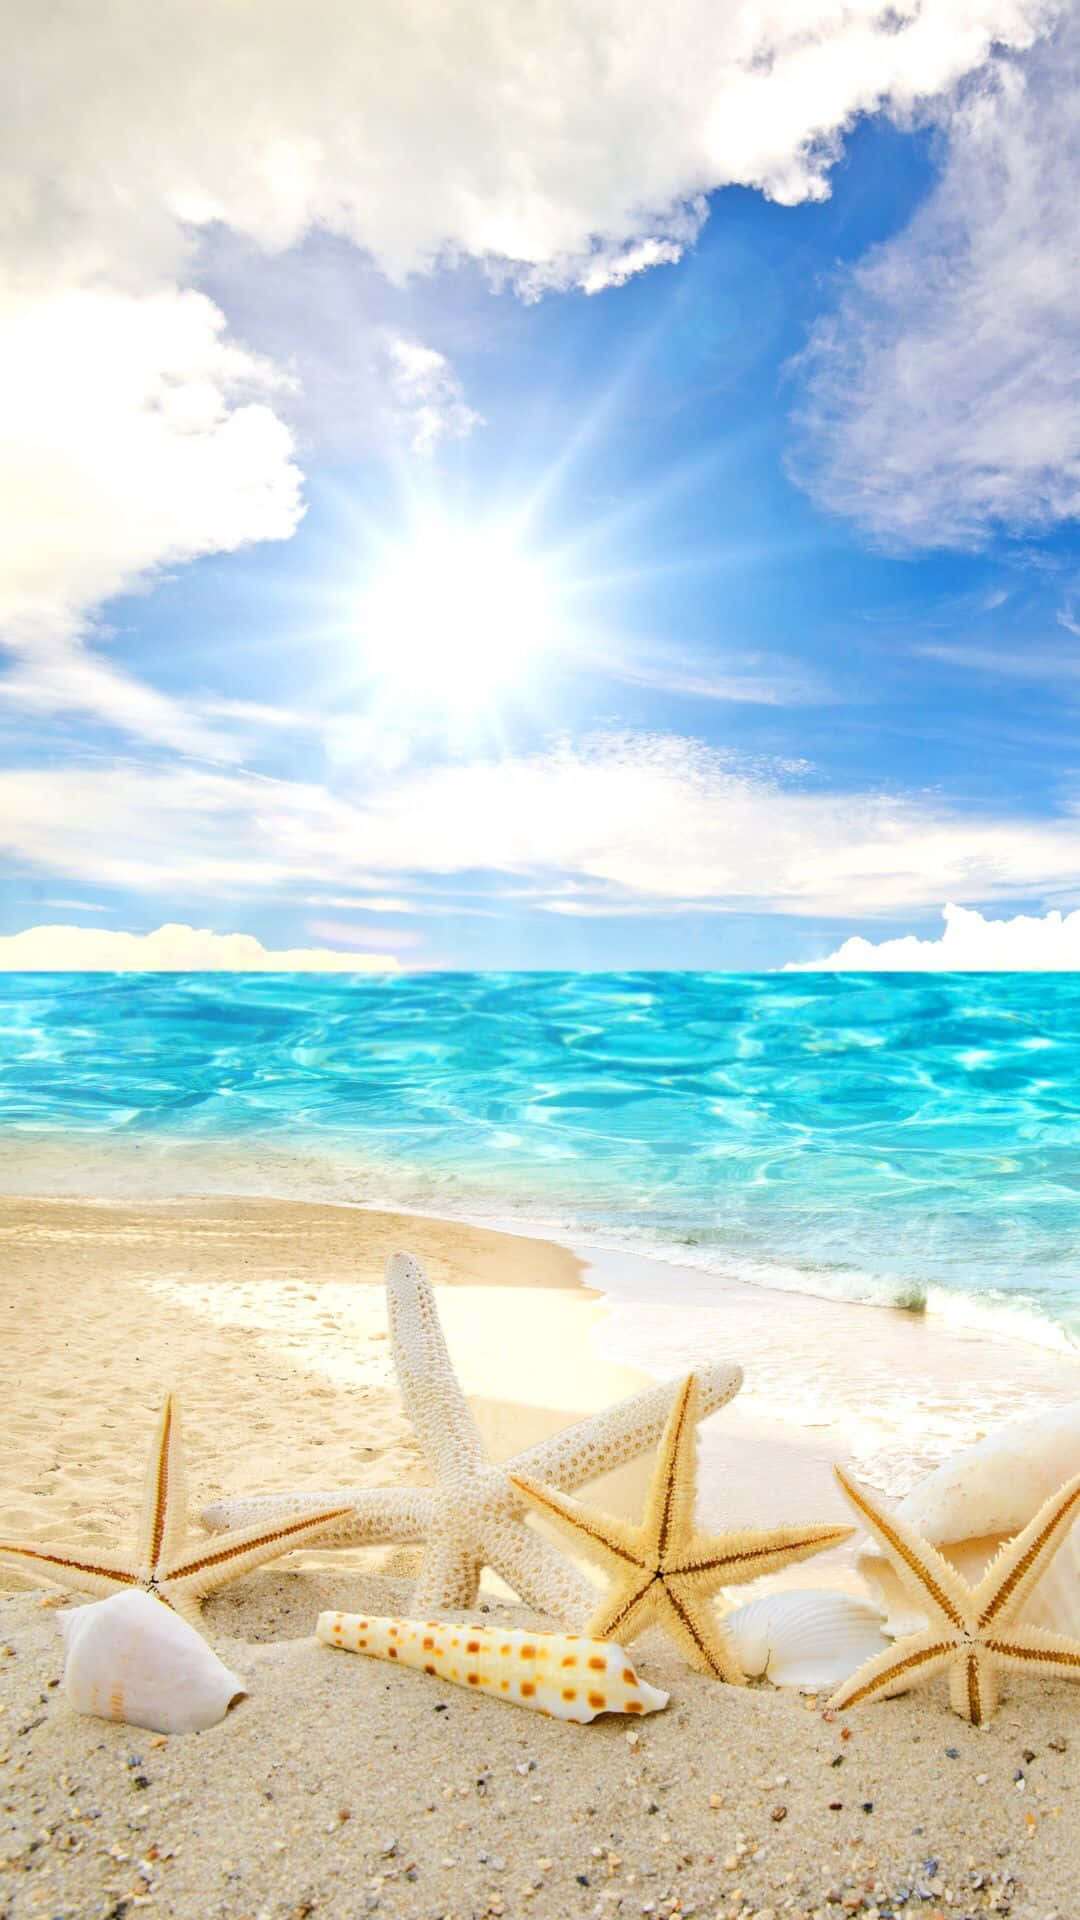 50 Pretty Beach Aesthetic Wallpapers For Free  Restore Decor  More